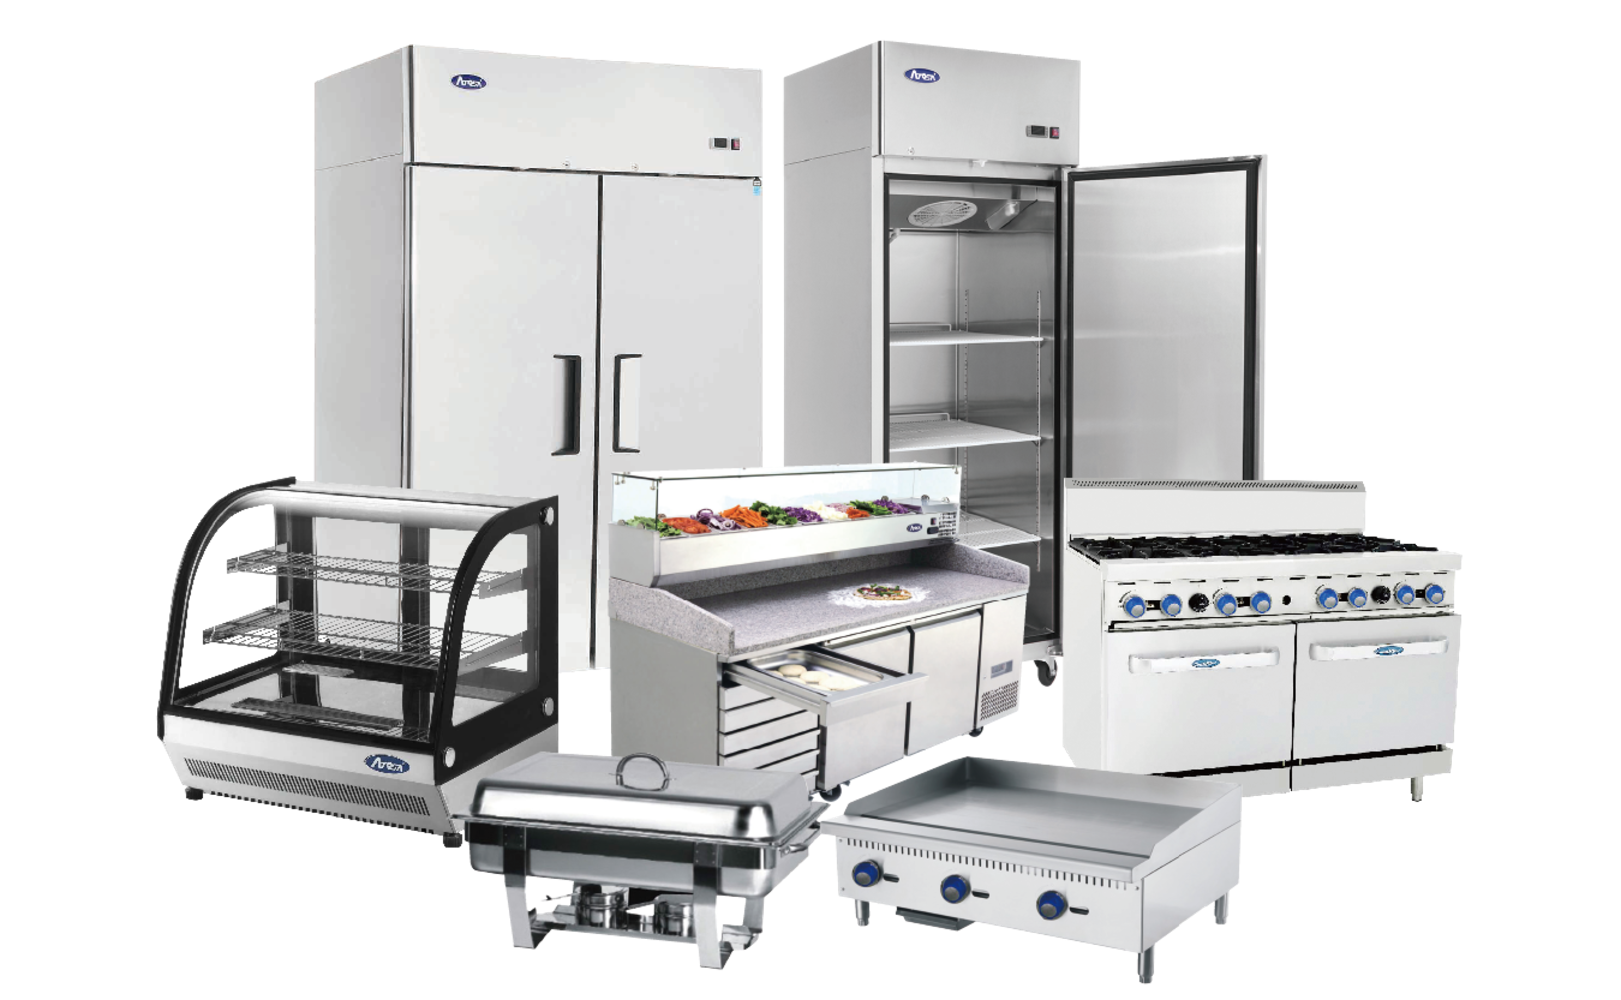 LIQUIDATION OF CATERING COMPANY ASSETS | TO INCLUDE PIZZA OVENS, FRYERS, COOKERS, FRIDGES, FREEZERS & MORE